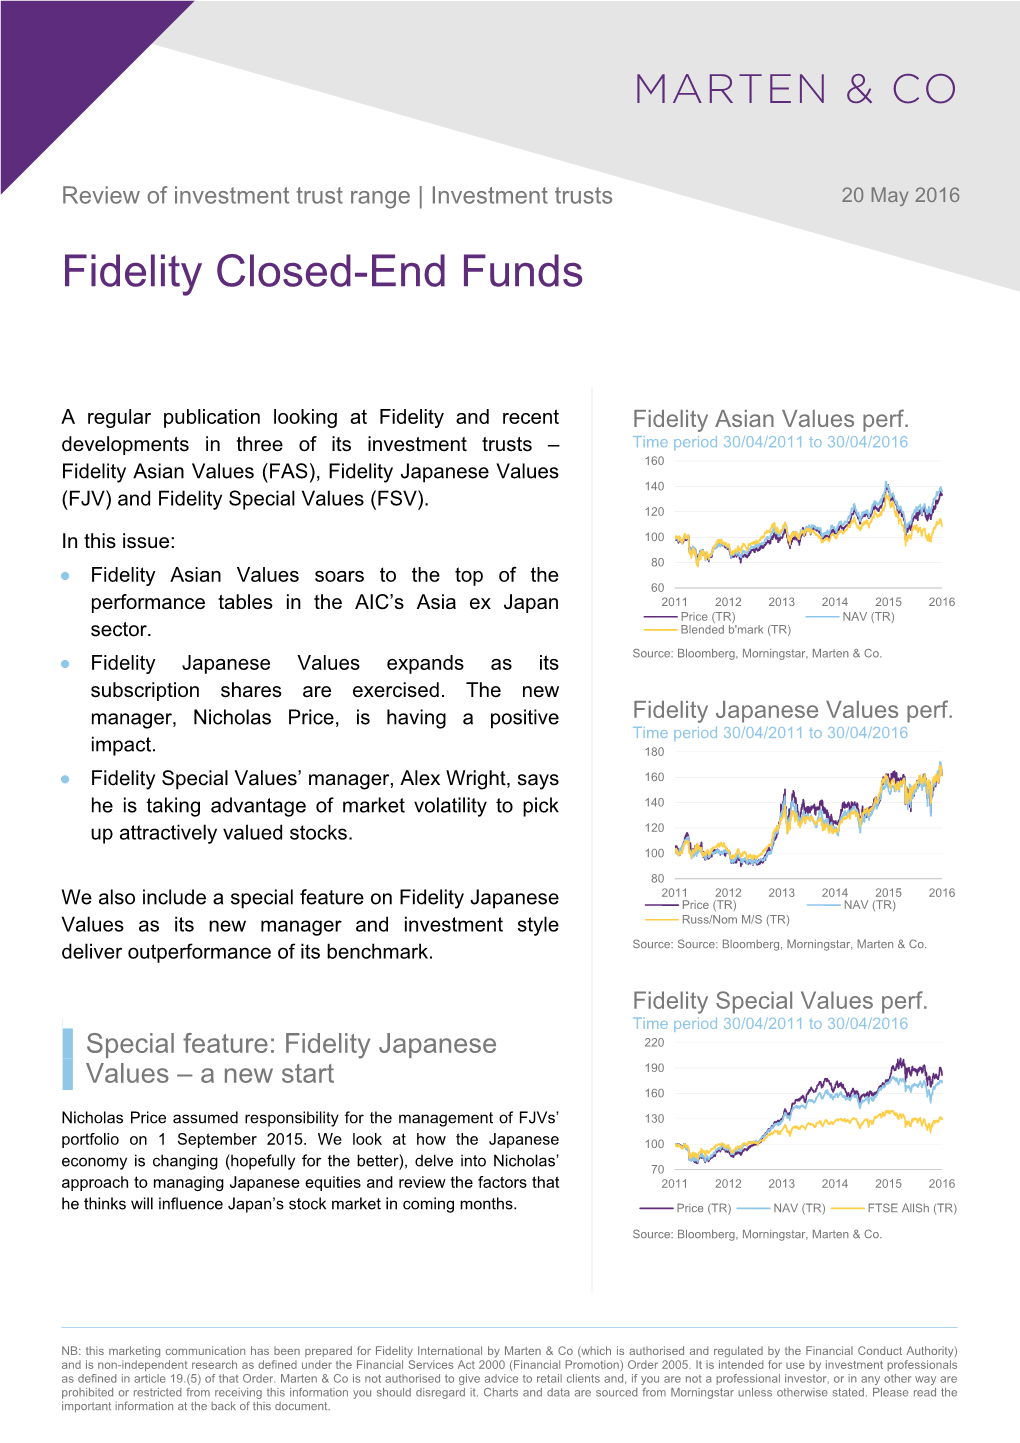 Fidelity Closed-End Funds